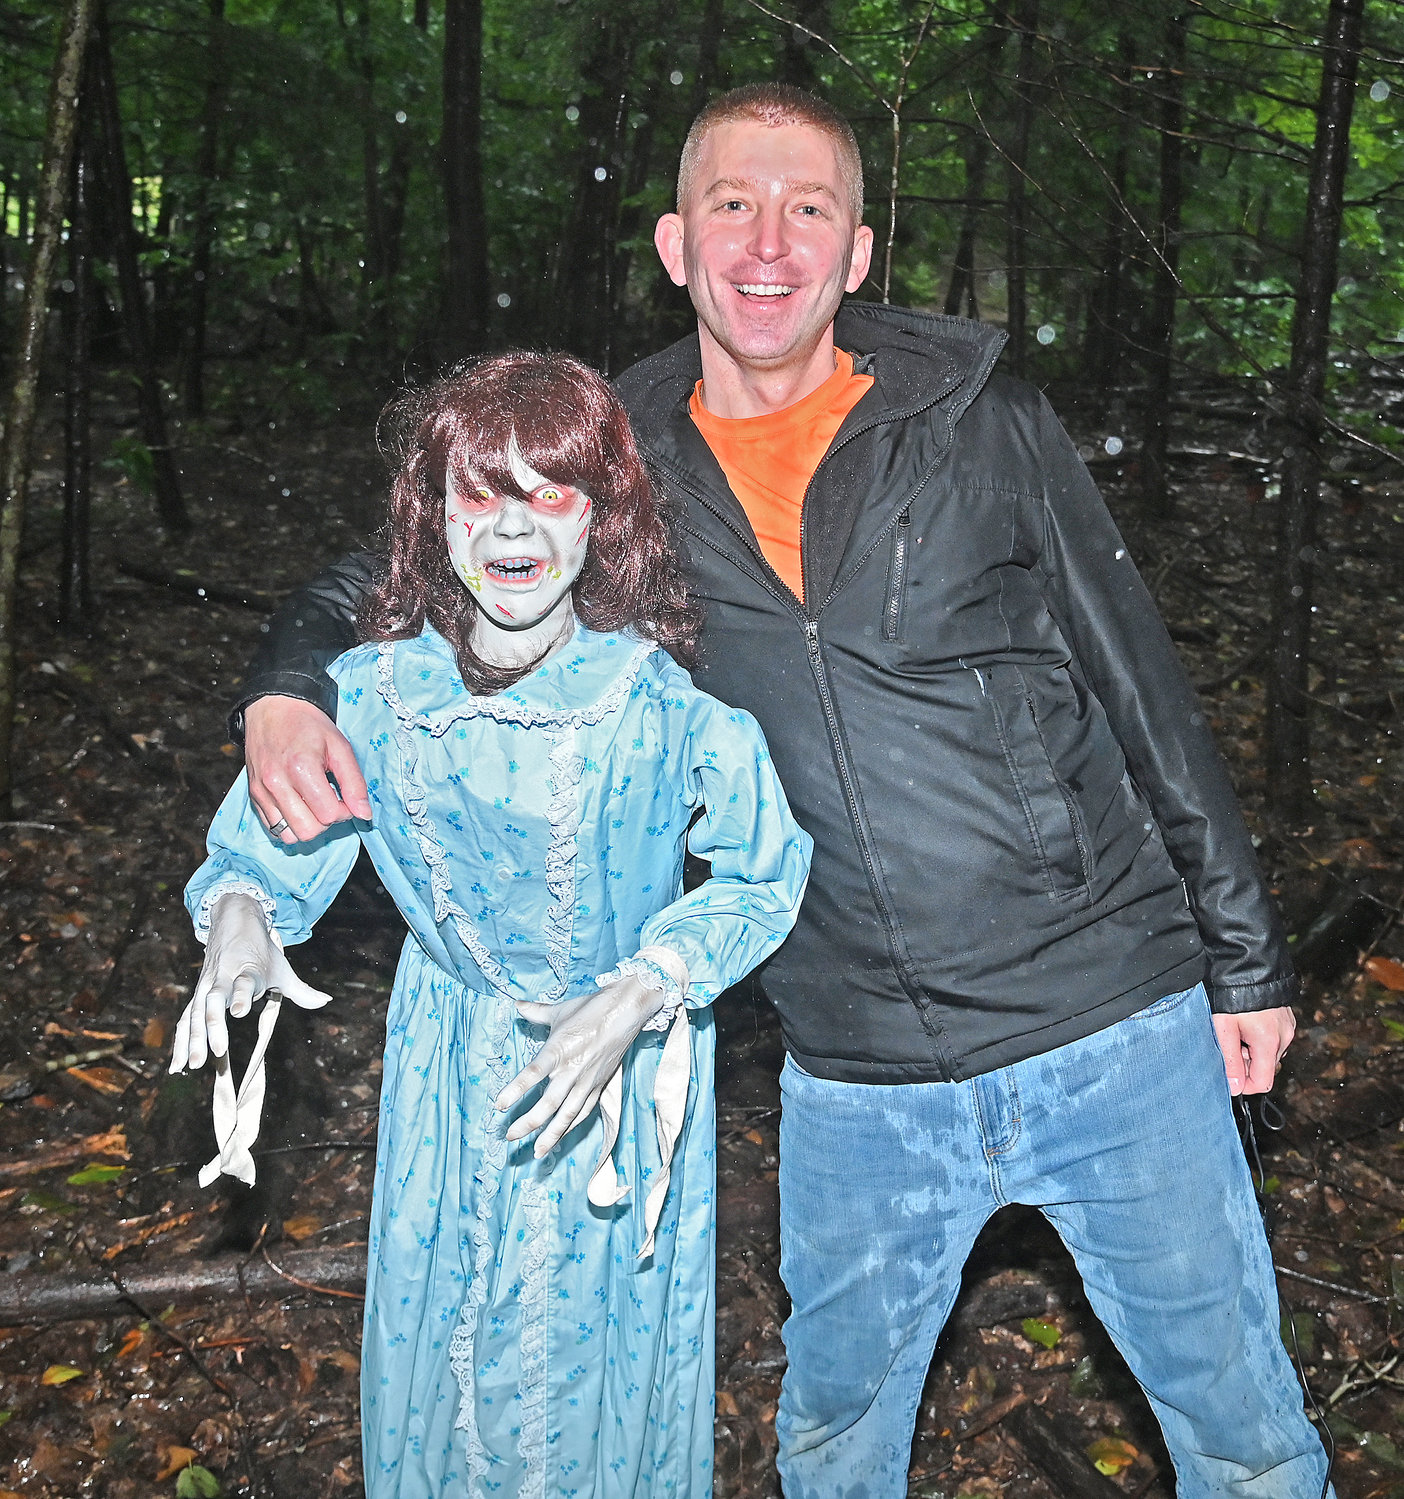 Haunting in the Woods trail creator Bert van der Werff, 3200 Forward Road, Blossvale, poses with the Regan MacNeil character from the Exorcist movie along his wooded trail, full of monsters and characters from horror movies. The Halloween trail opens to the public on Sept. 29.